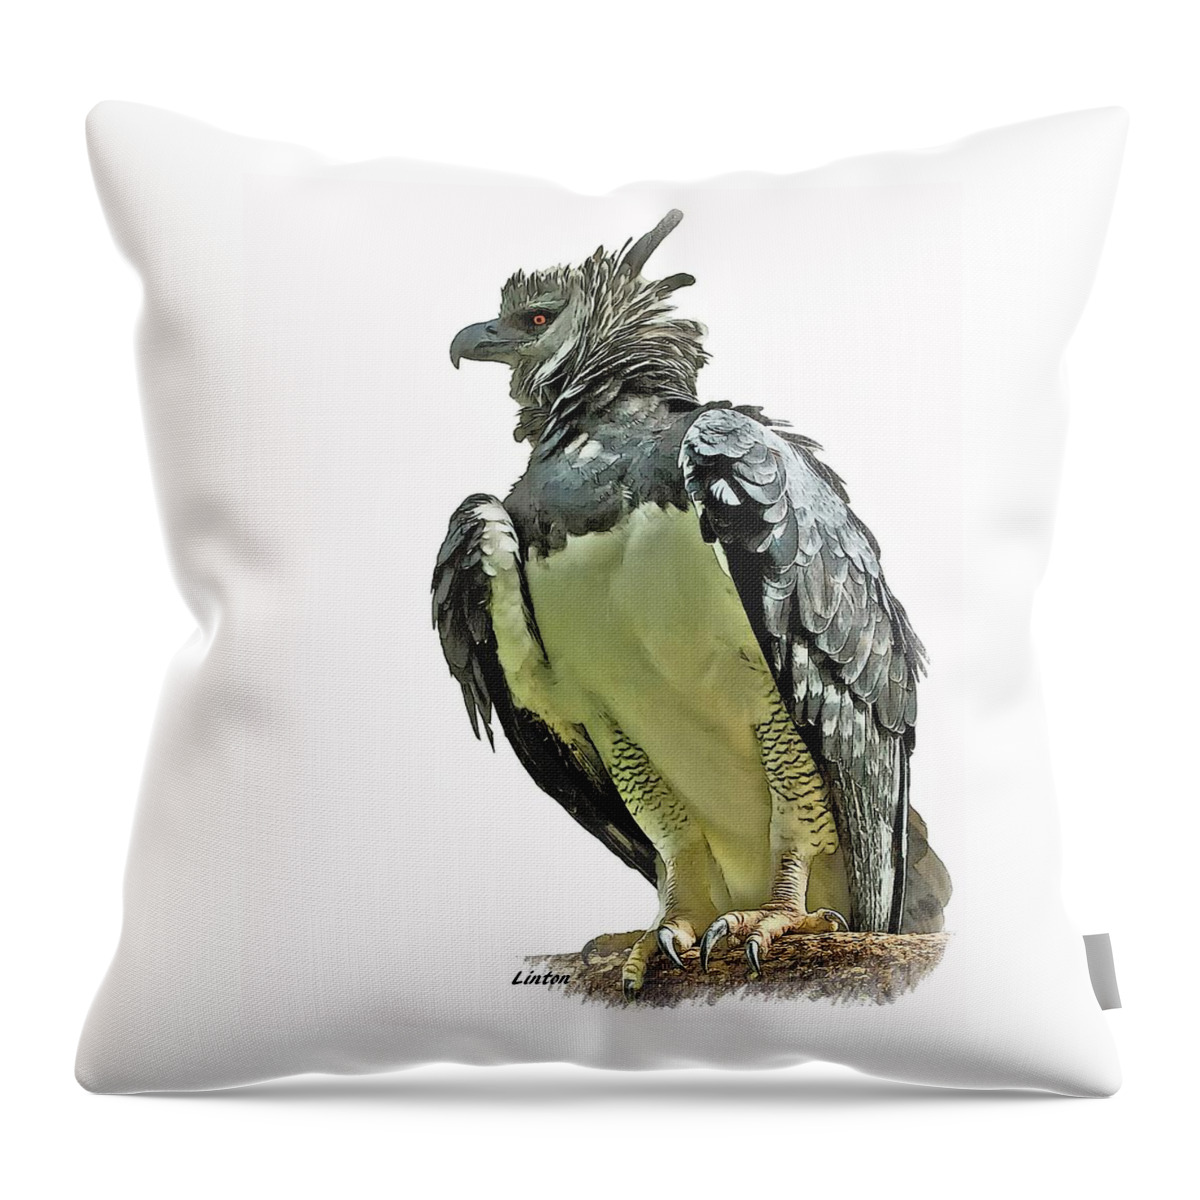 Harpy Eagle Throw Pillow featuring the digital art Harpy Eagle by Larry Linton